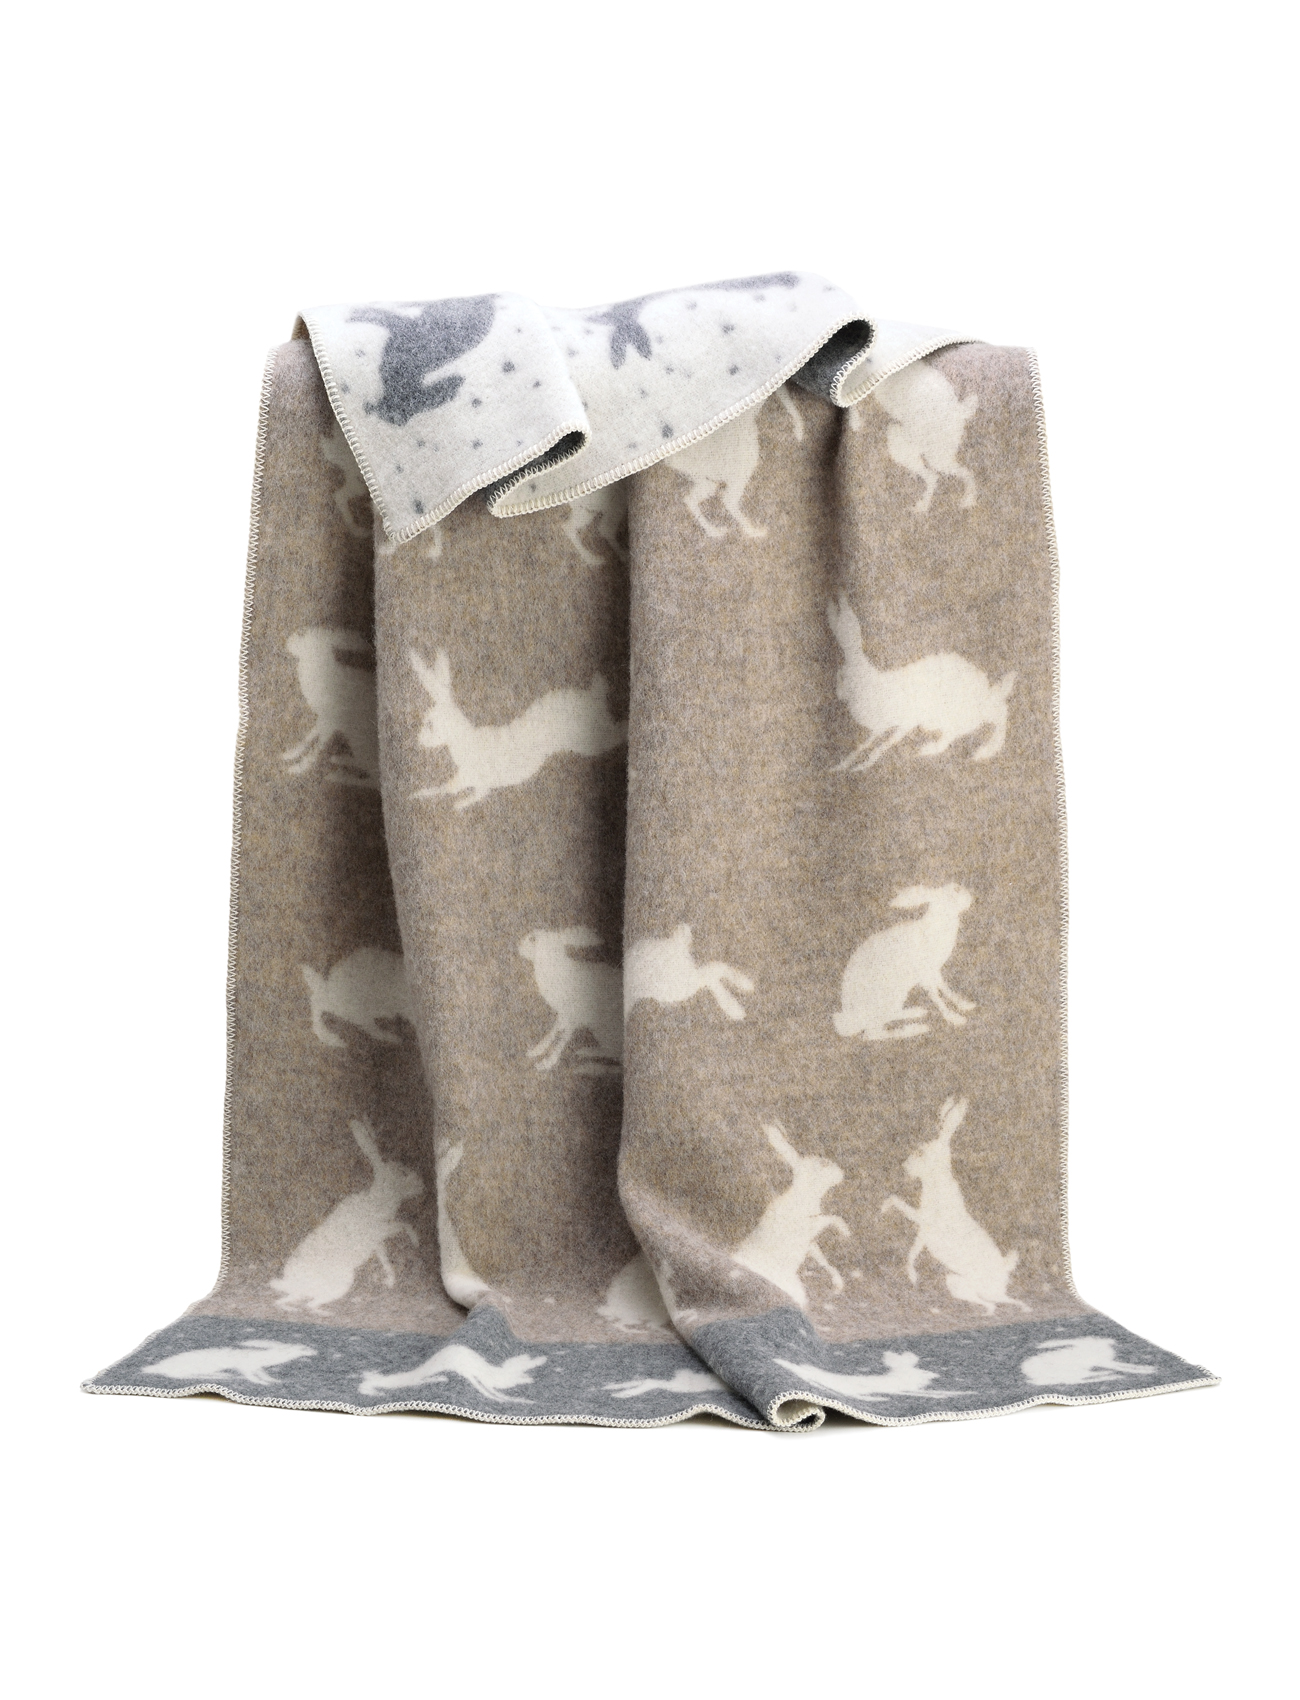 Soft Wool Blanket Sheep Dog Cat or Hare designs by JJ Textile High Quality 